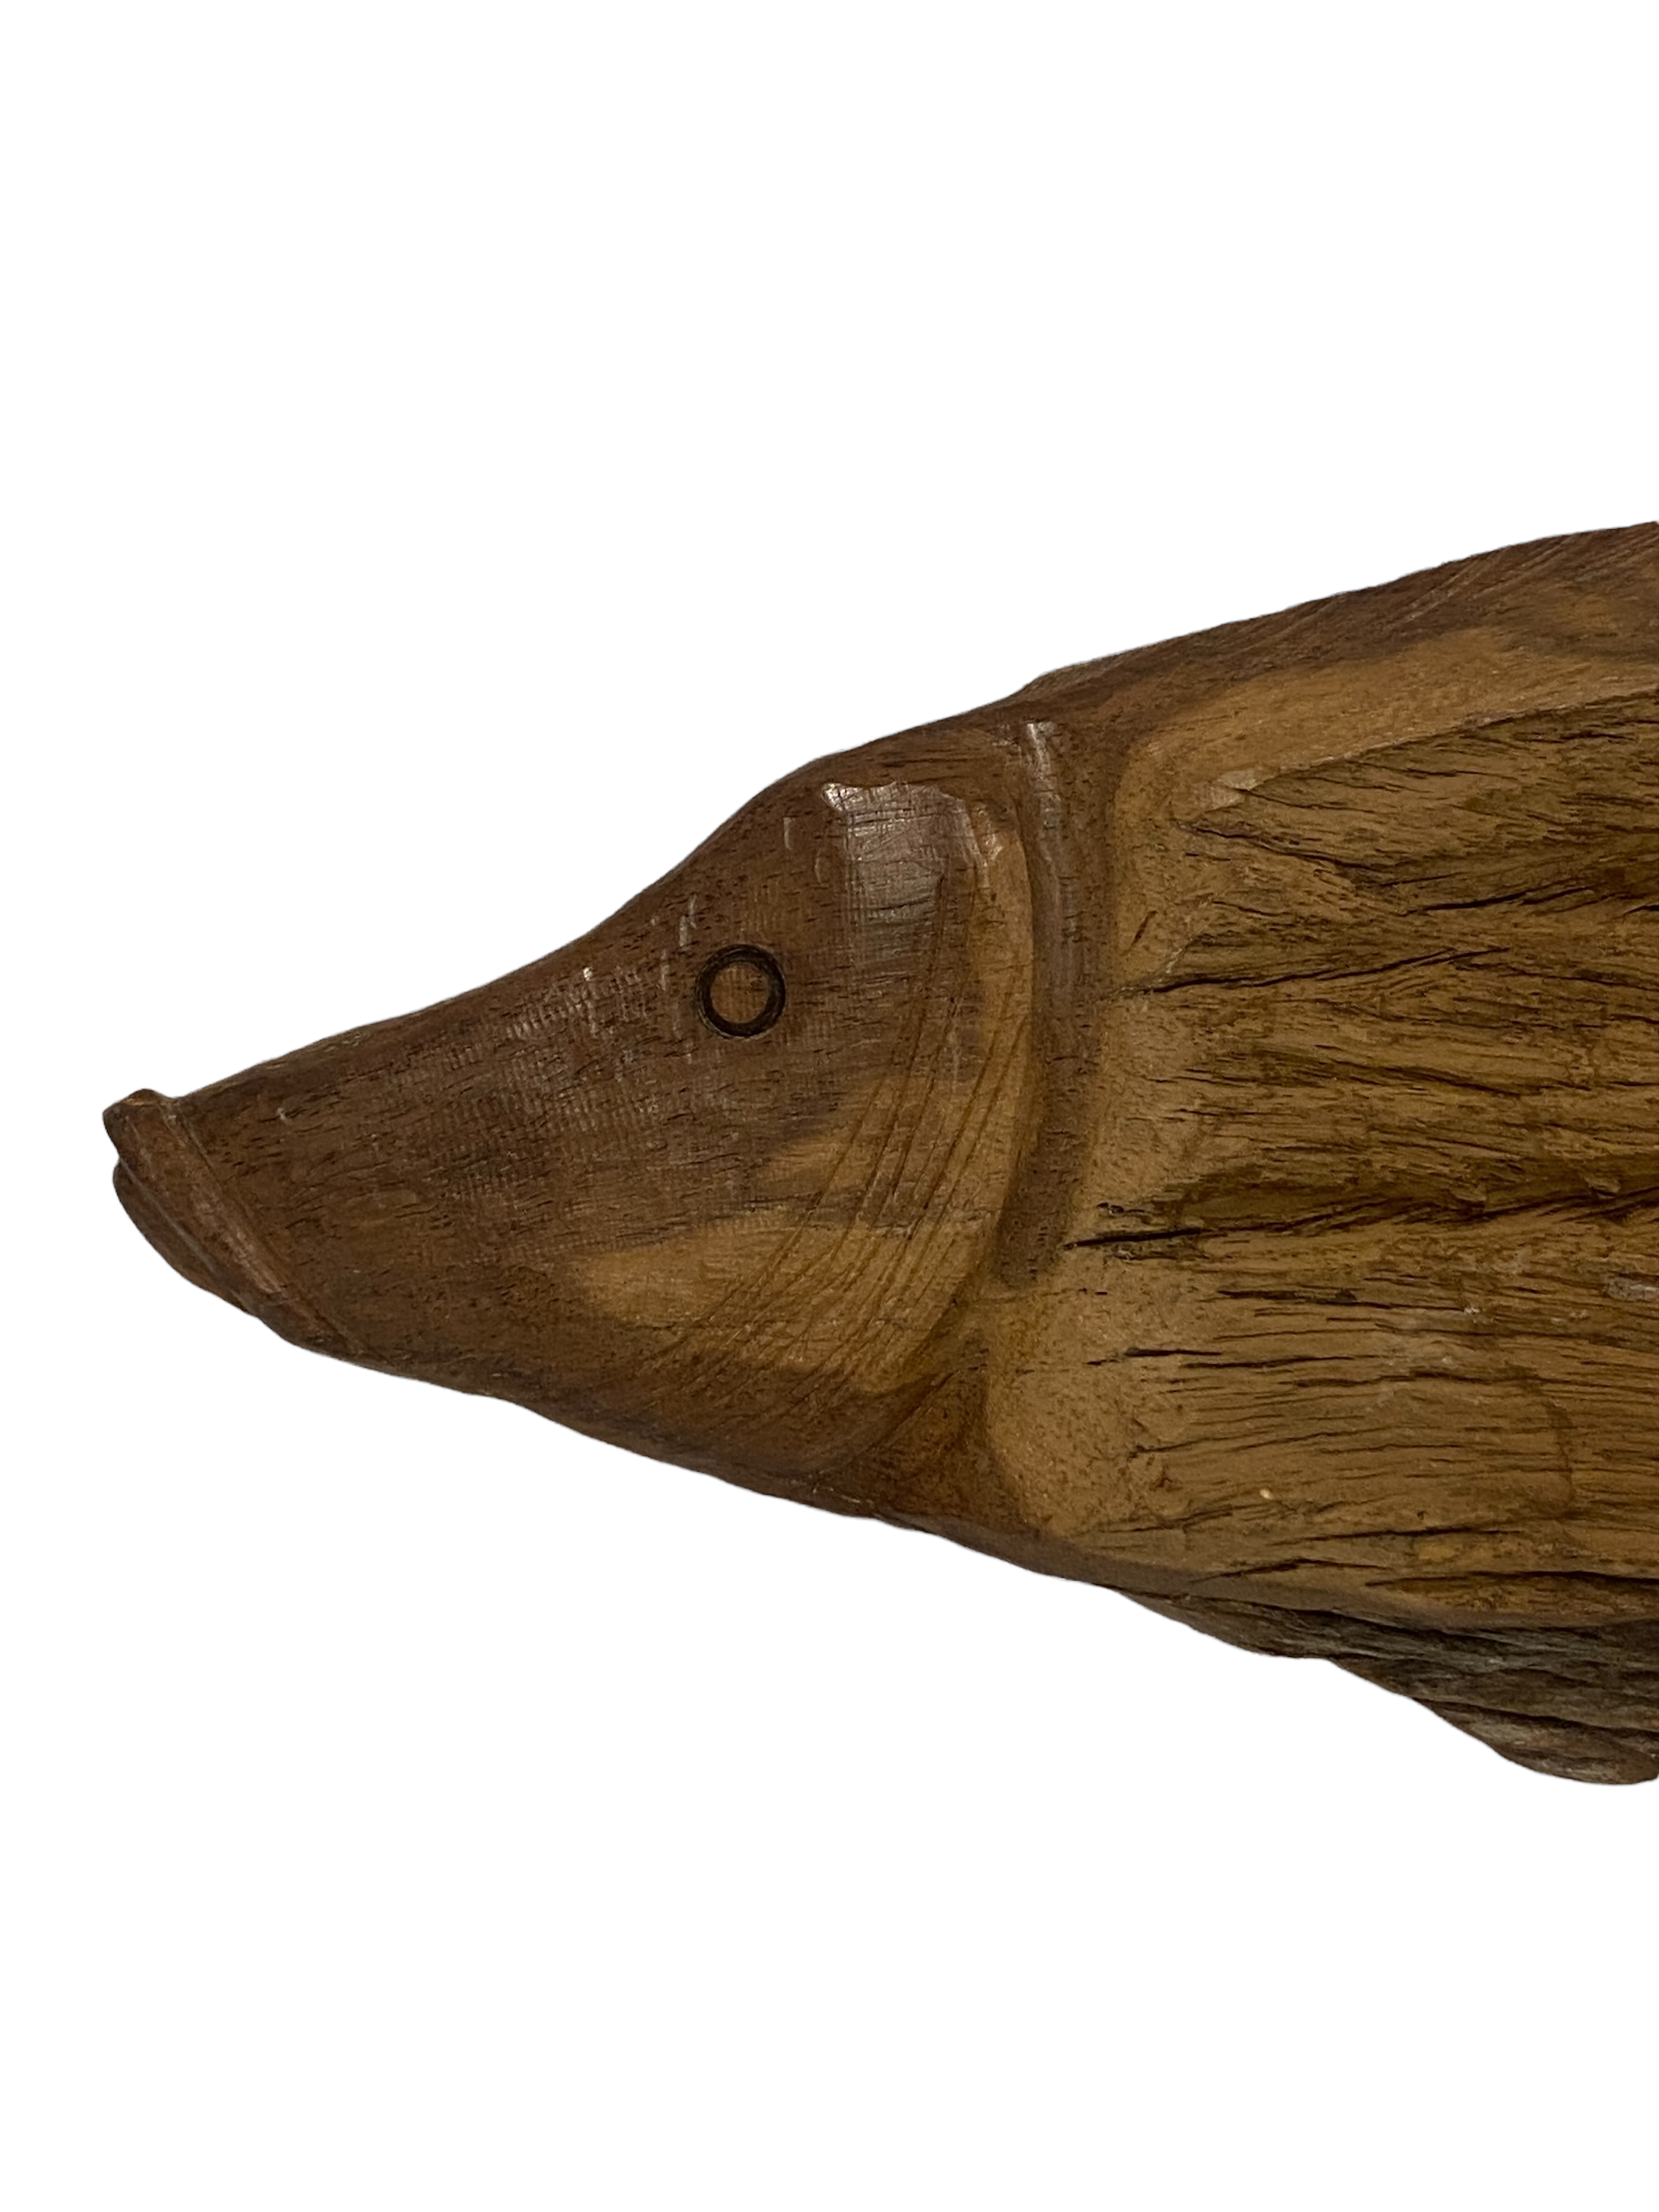 Driftwood Hand Carved Fish - (13.8) Large